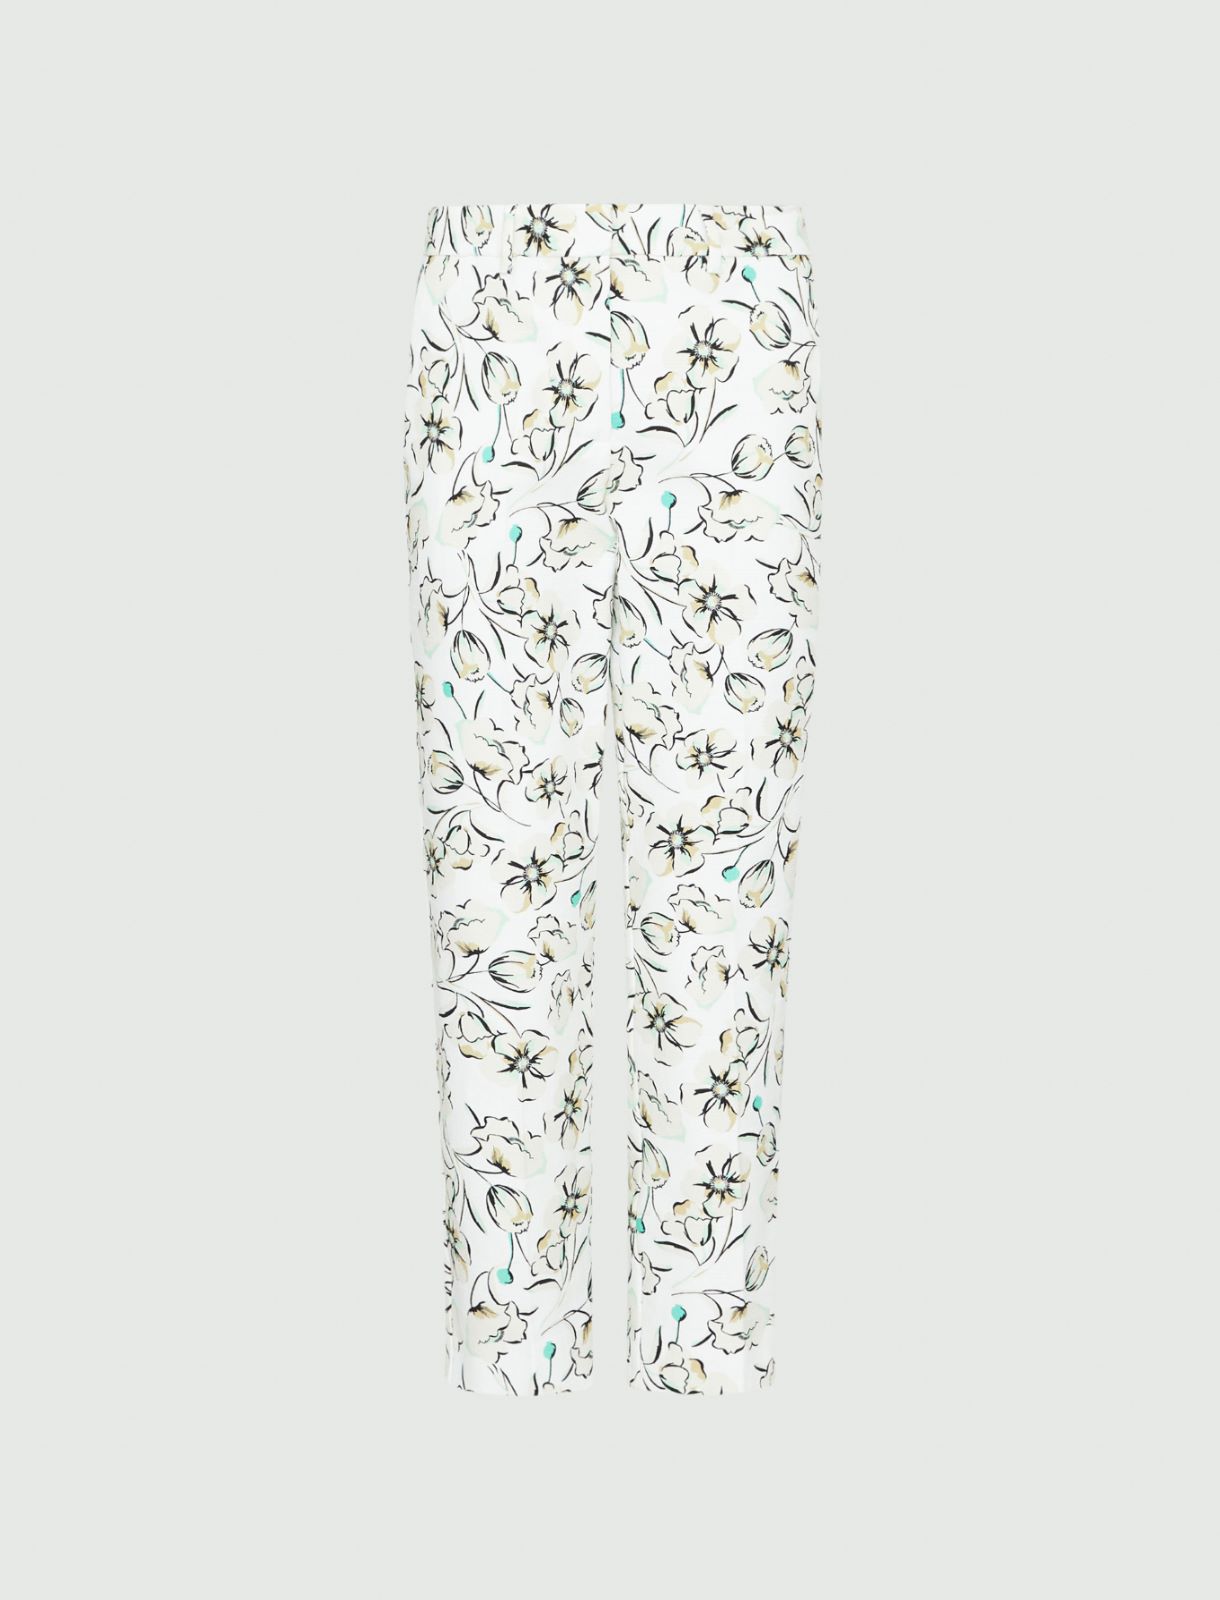 Patterned trousers - Green - Marella - 5